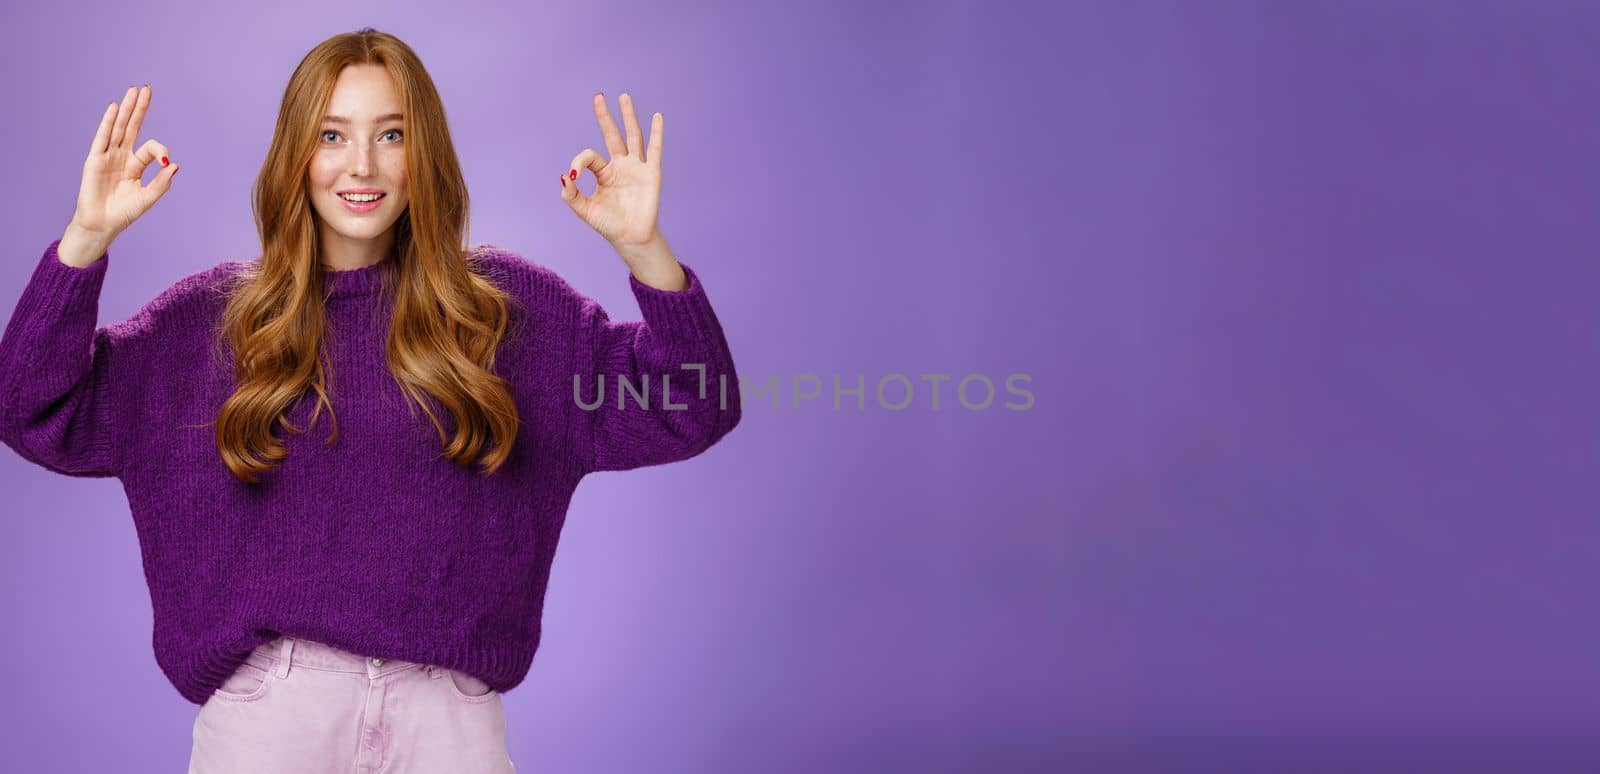 Fine I agree. Portrait of friendly and optimstic young 20s ginger girl in purple sweater raising hands with okay or ok gesture smiling in approval, liking cool product, giving recommendation.